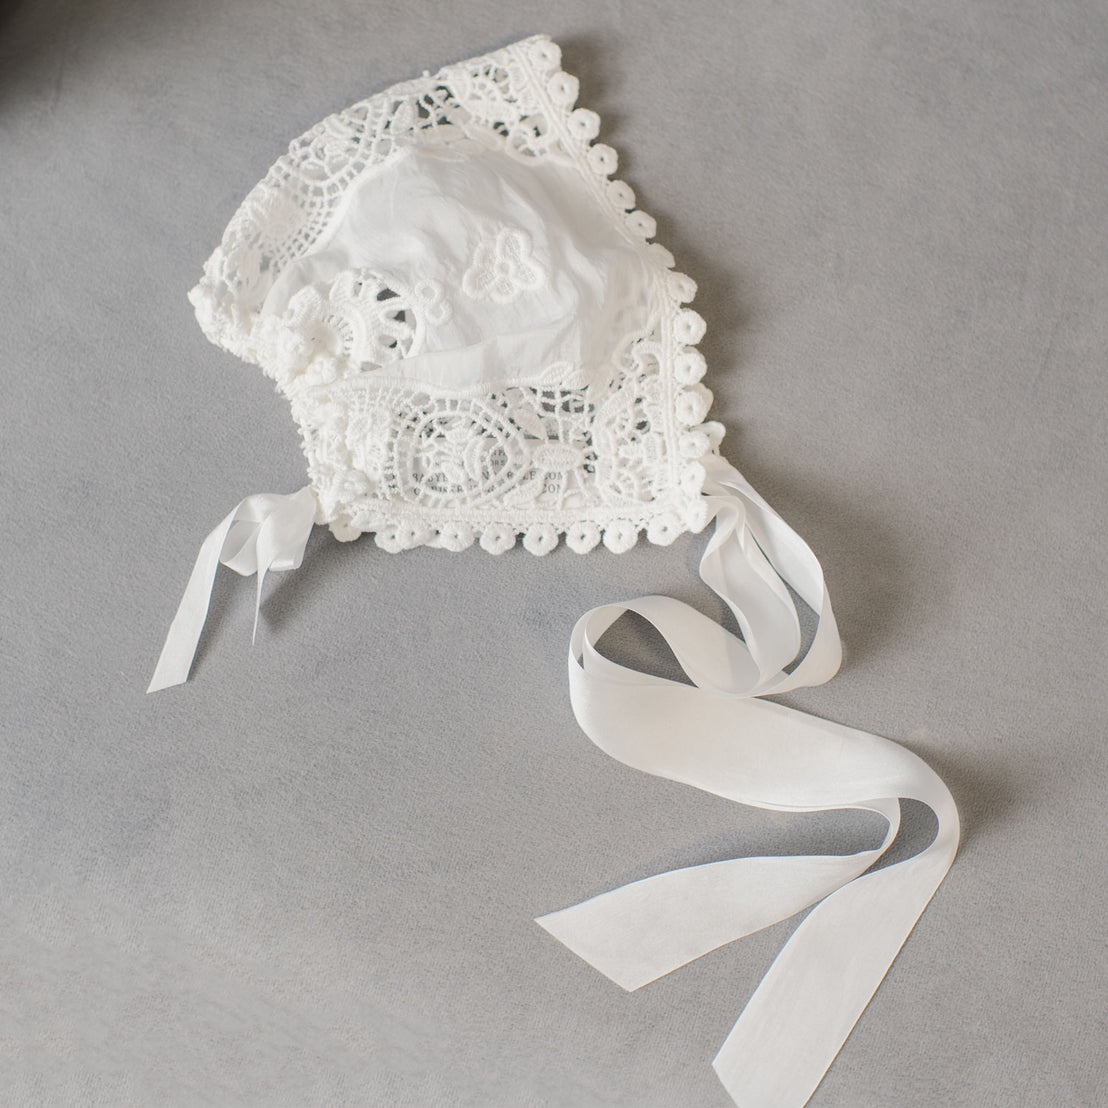 A delicate Grace Christening Bonnet with silk sash tie photographed on a gray background, showcasing intricate patterns and floral designs.